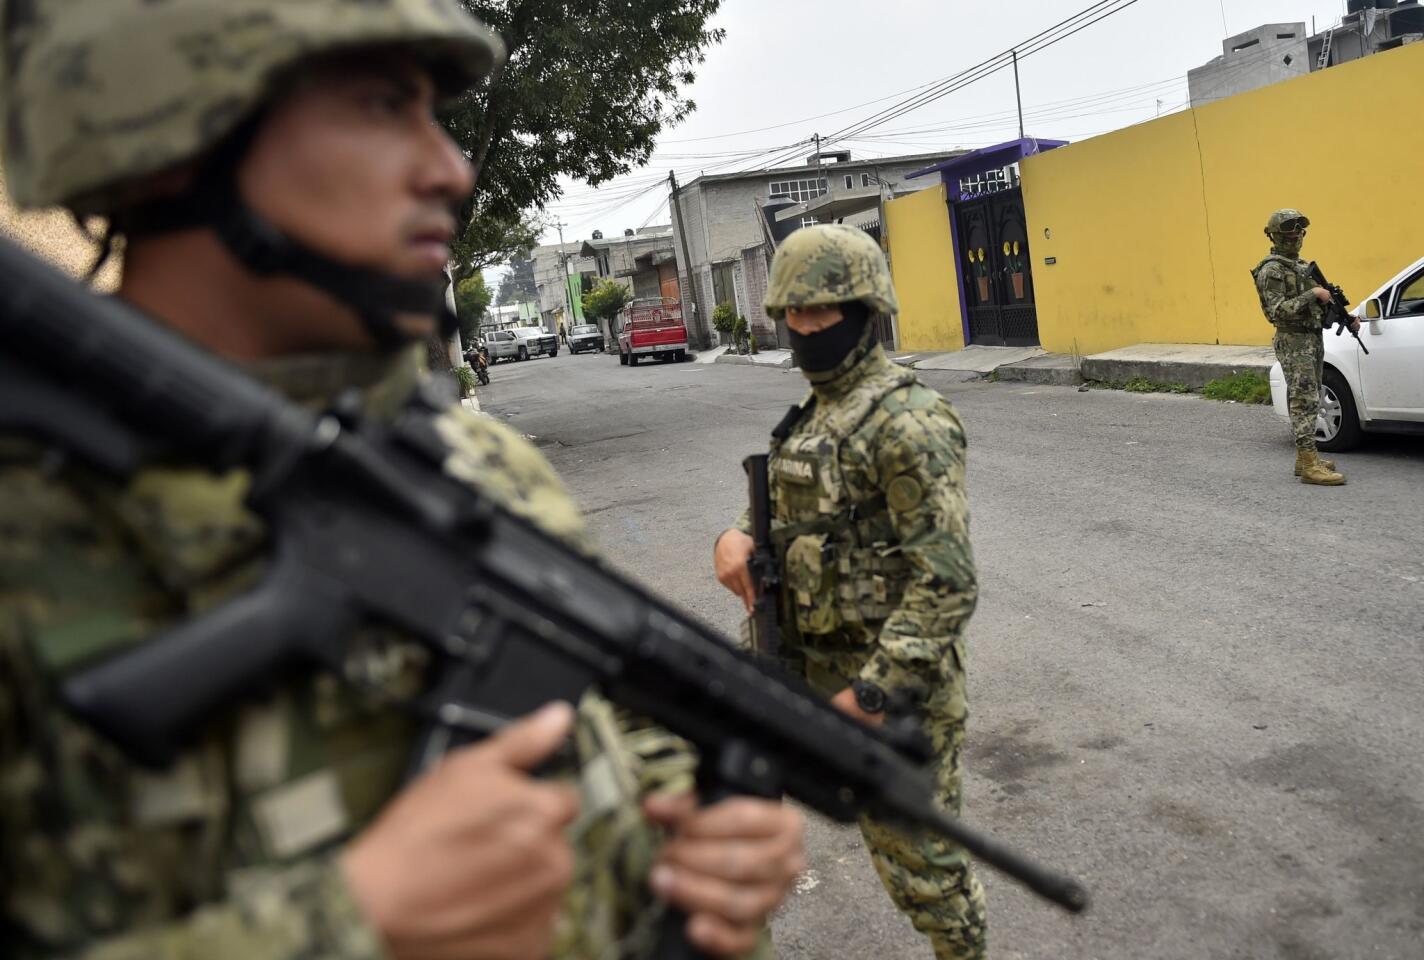 Mexican marines guard the scene of a shootout in which eight suspected drug traffickers were shot dead in Tlahuac, Mexico City on July 20, 2017.